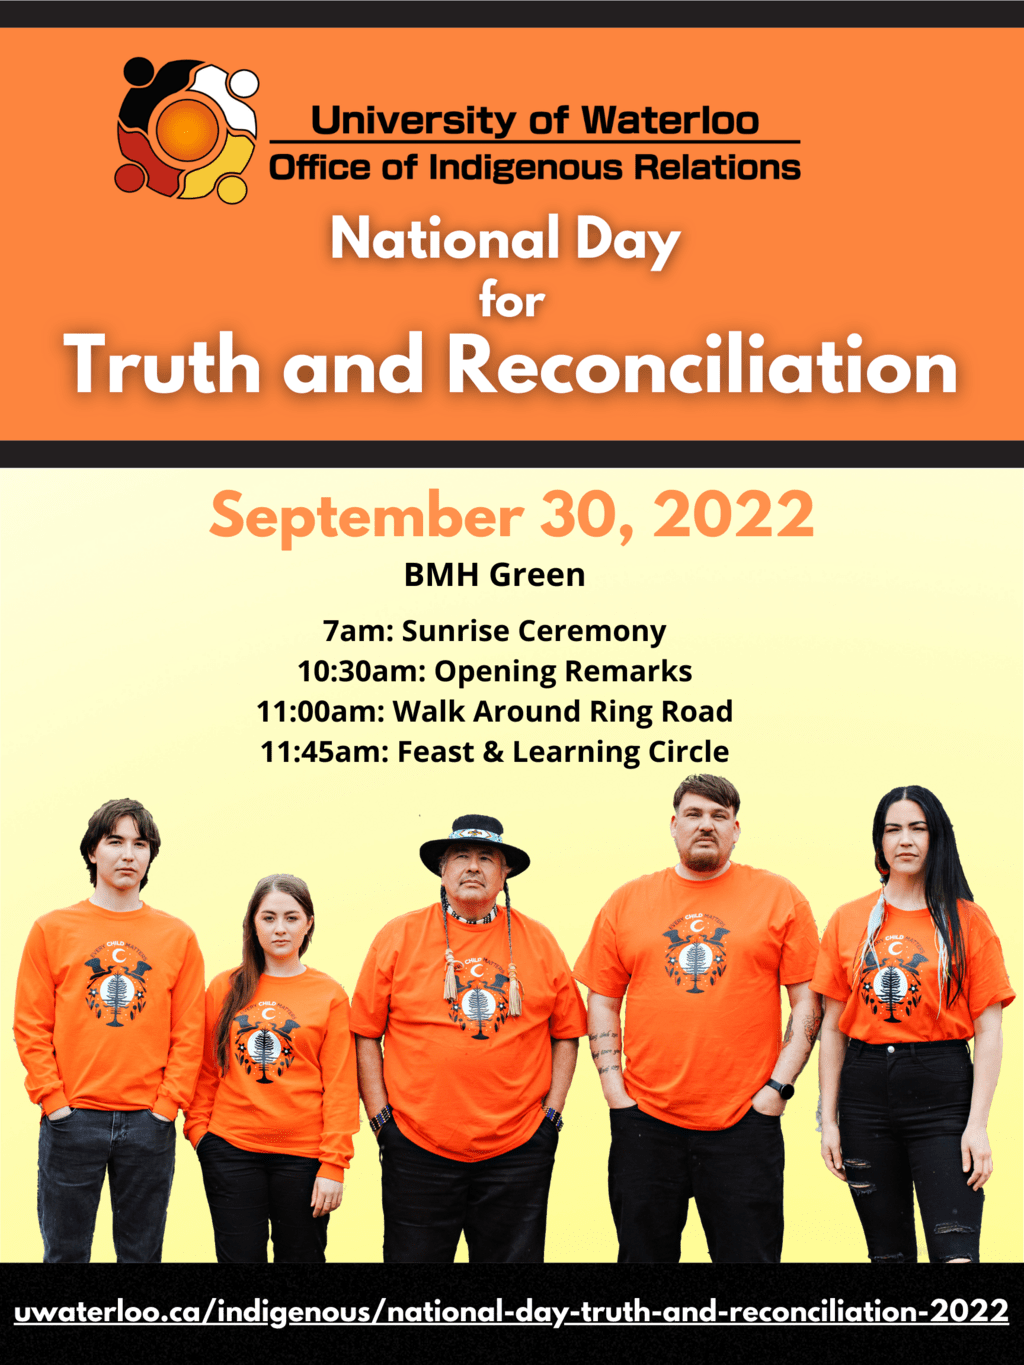 Five people wearing orange shirts with text about National Day for Truth and Reconciliation